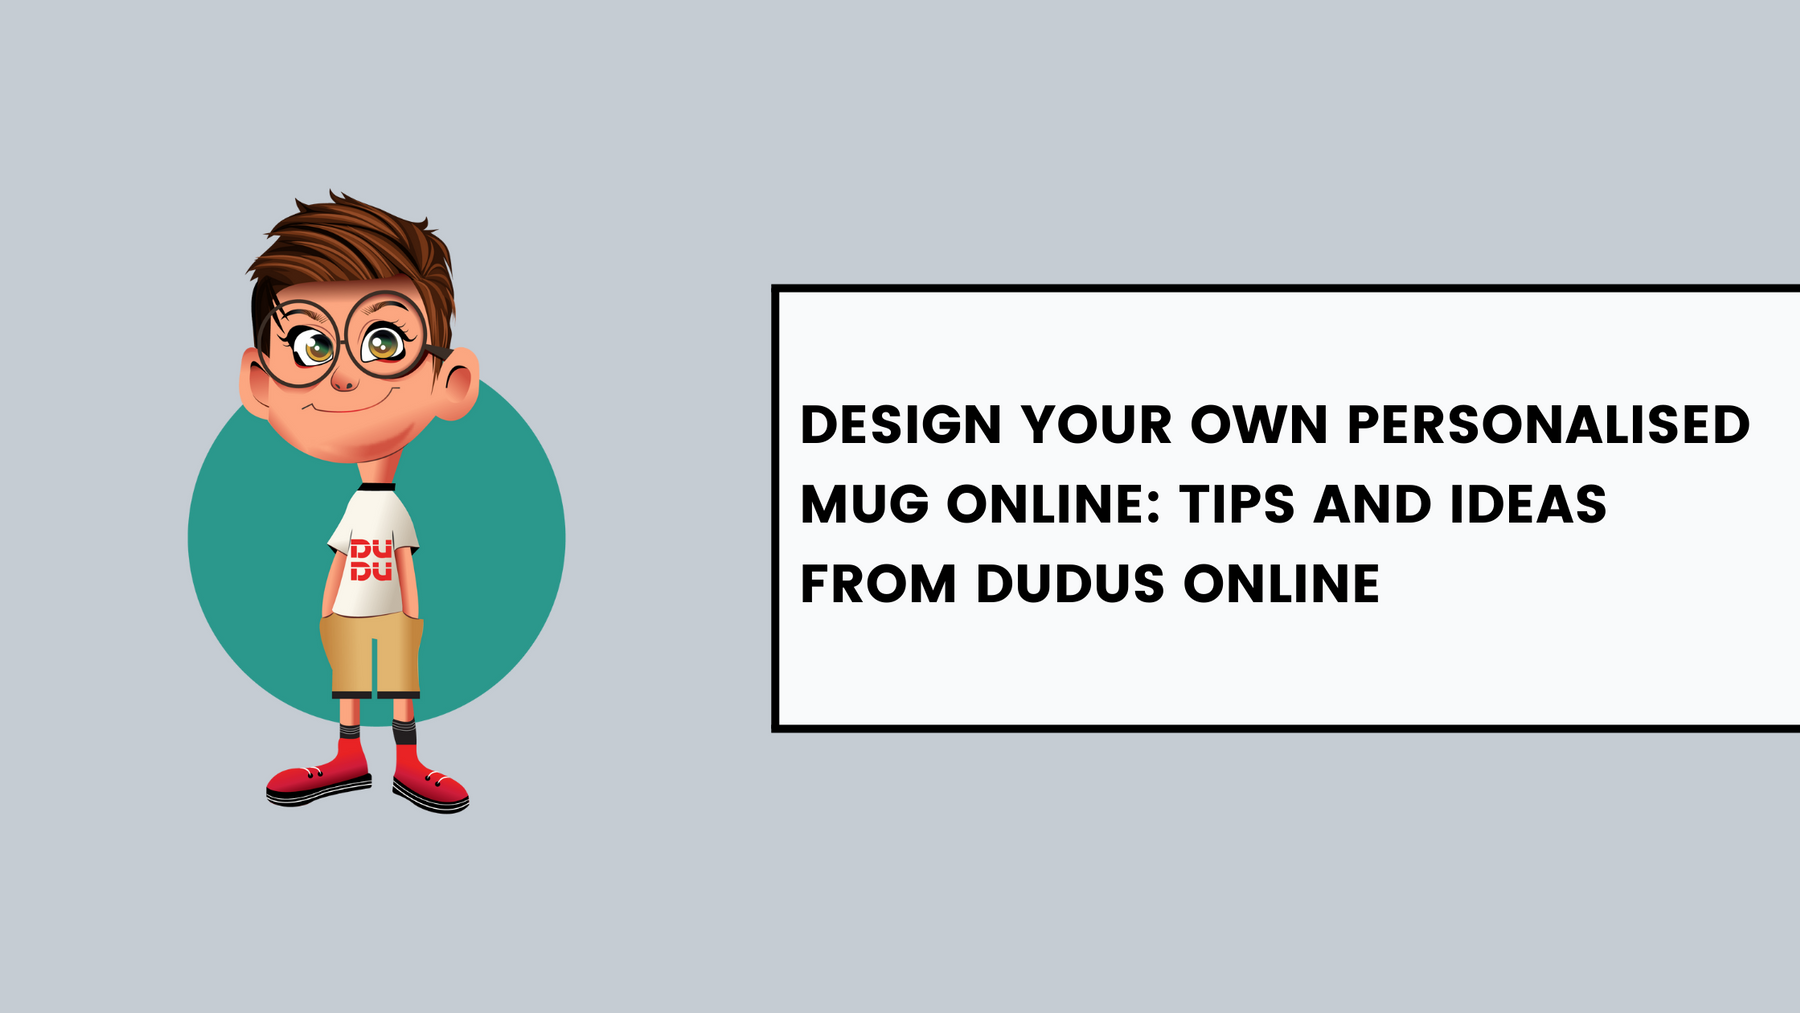 Design Your Own Personalised Mug Online: Tips and Ideas from Dudus Online